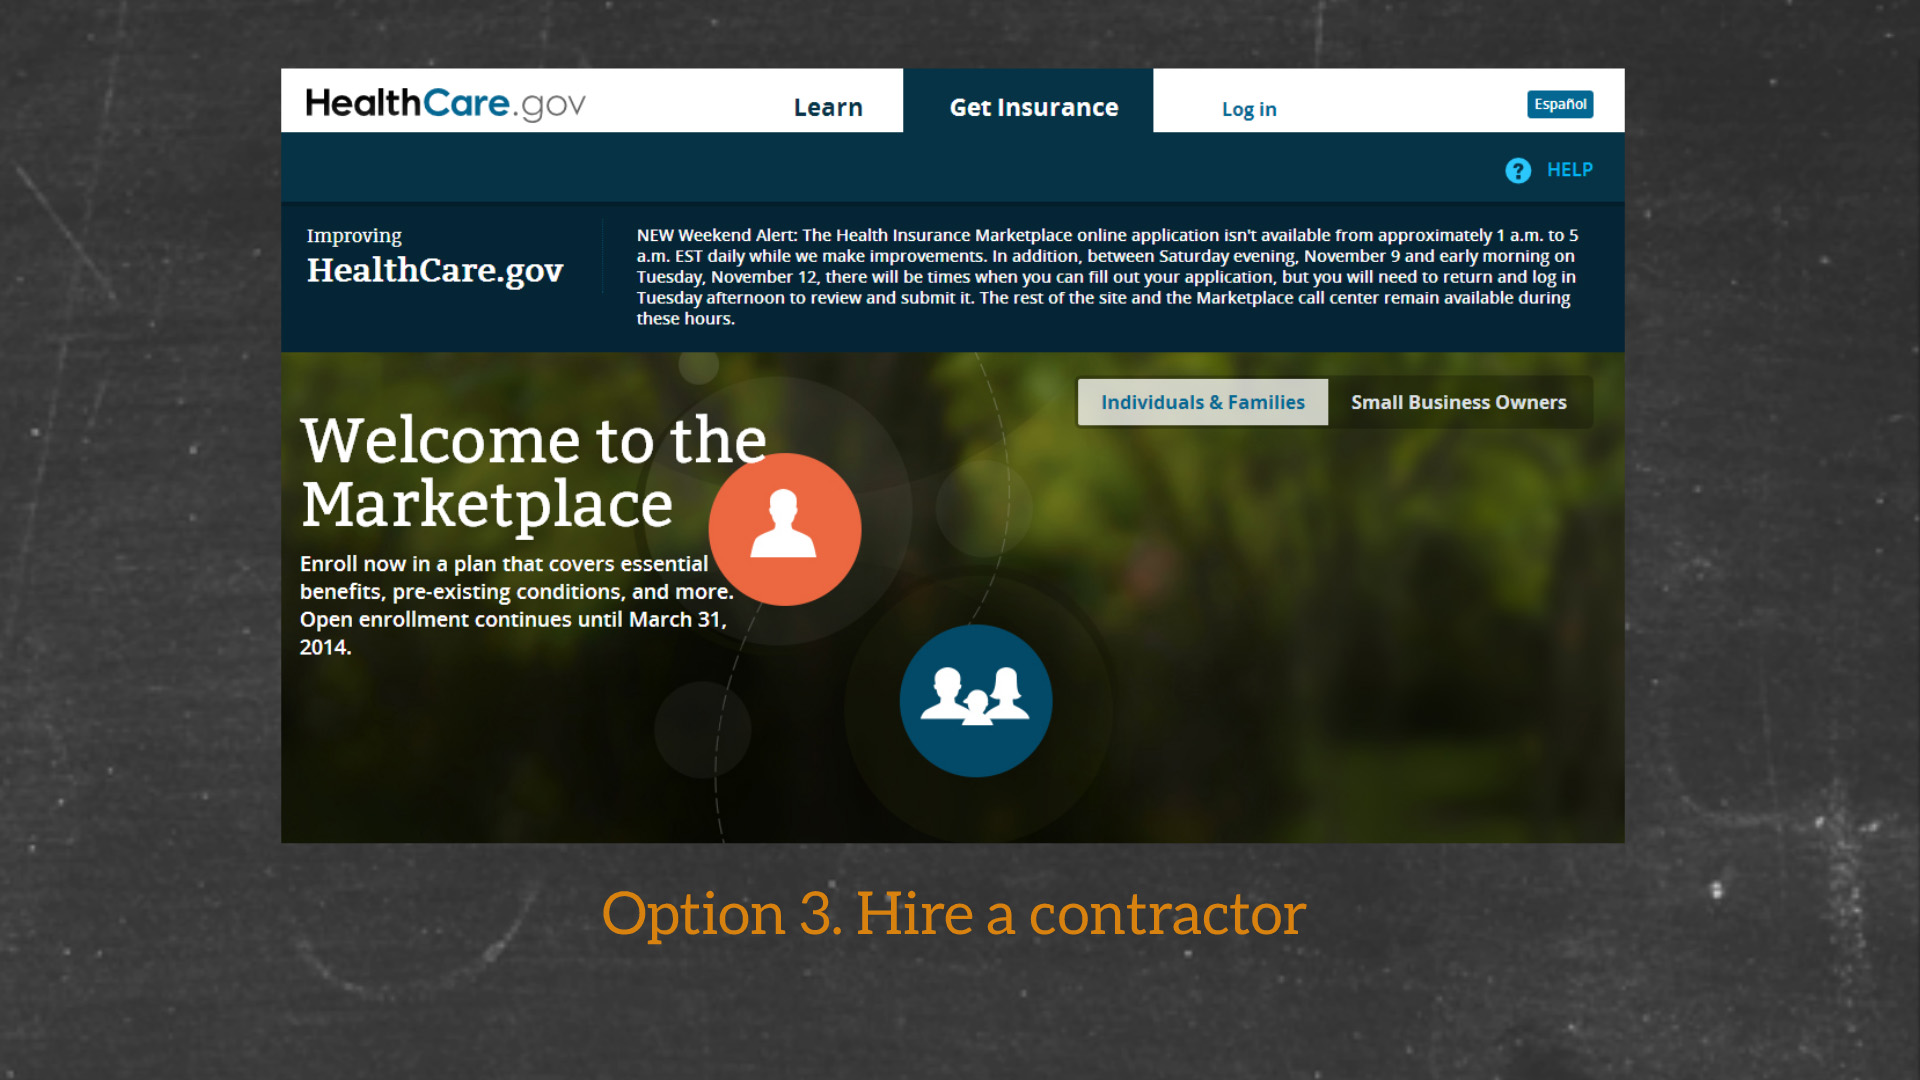 Option 3. Hire a contractor